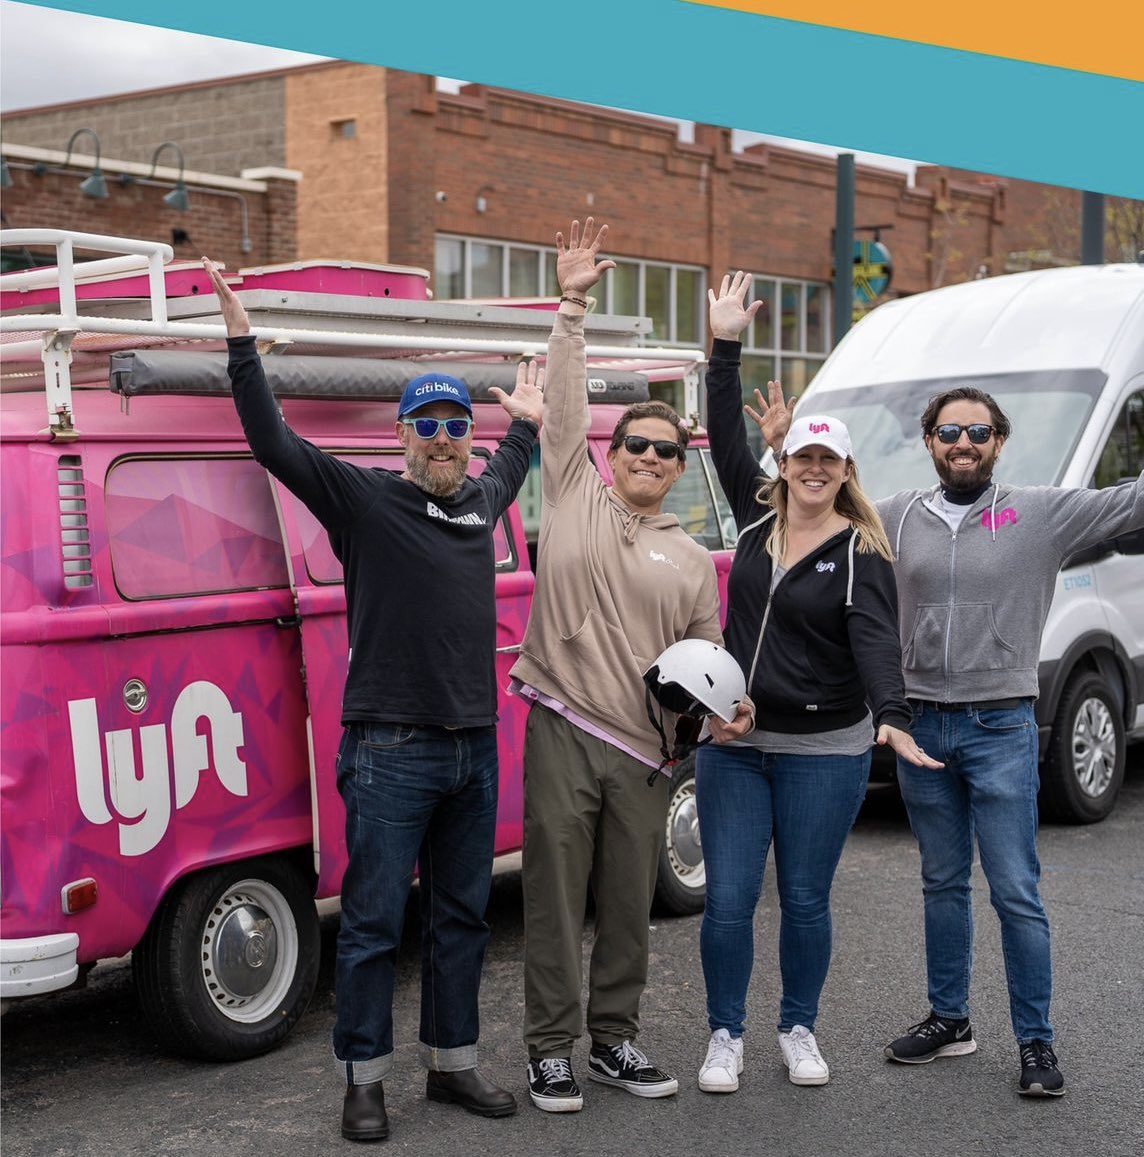 Did you stop by and say hi to the @lyft team on Sunday? We want to send a big thank you to @lyft for being our transportation sponsor! We can't wait to see you back out there on June 4th ! 🛴

📷 by Brent Andeck

#vivastreetsdenver #denver #ciclovia #lyft #denverevents